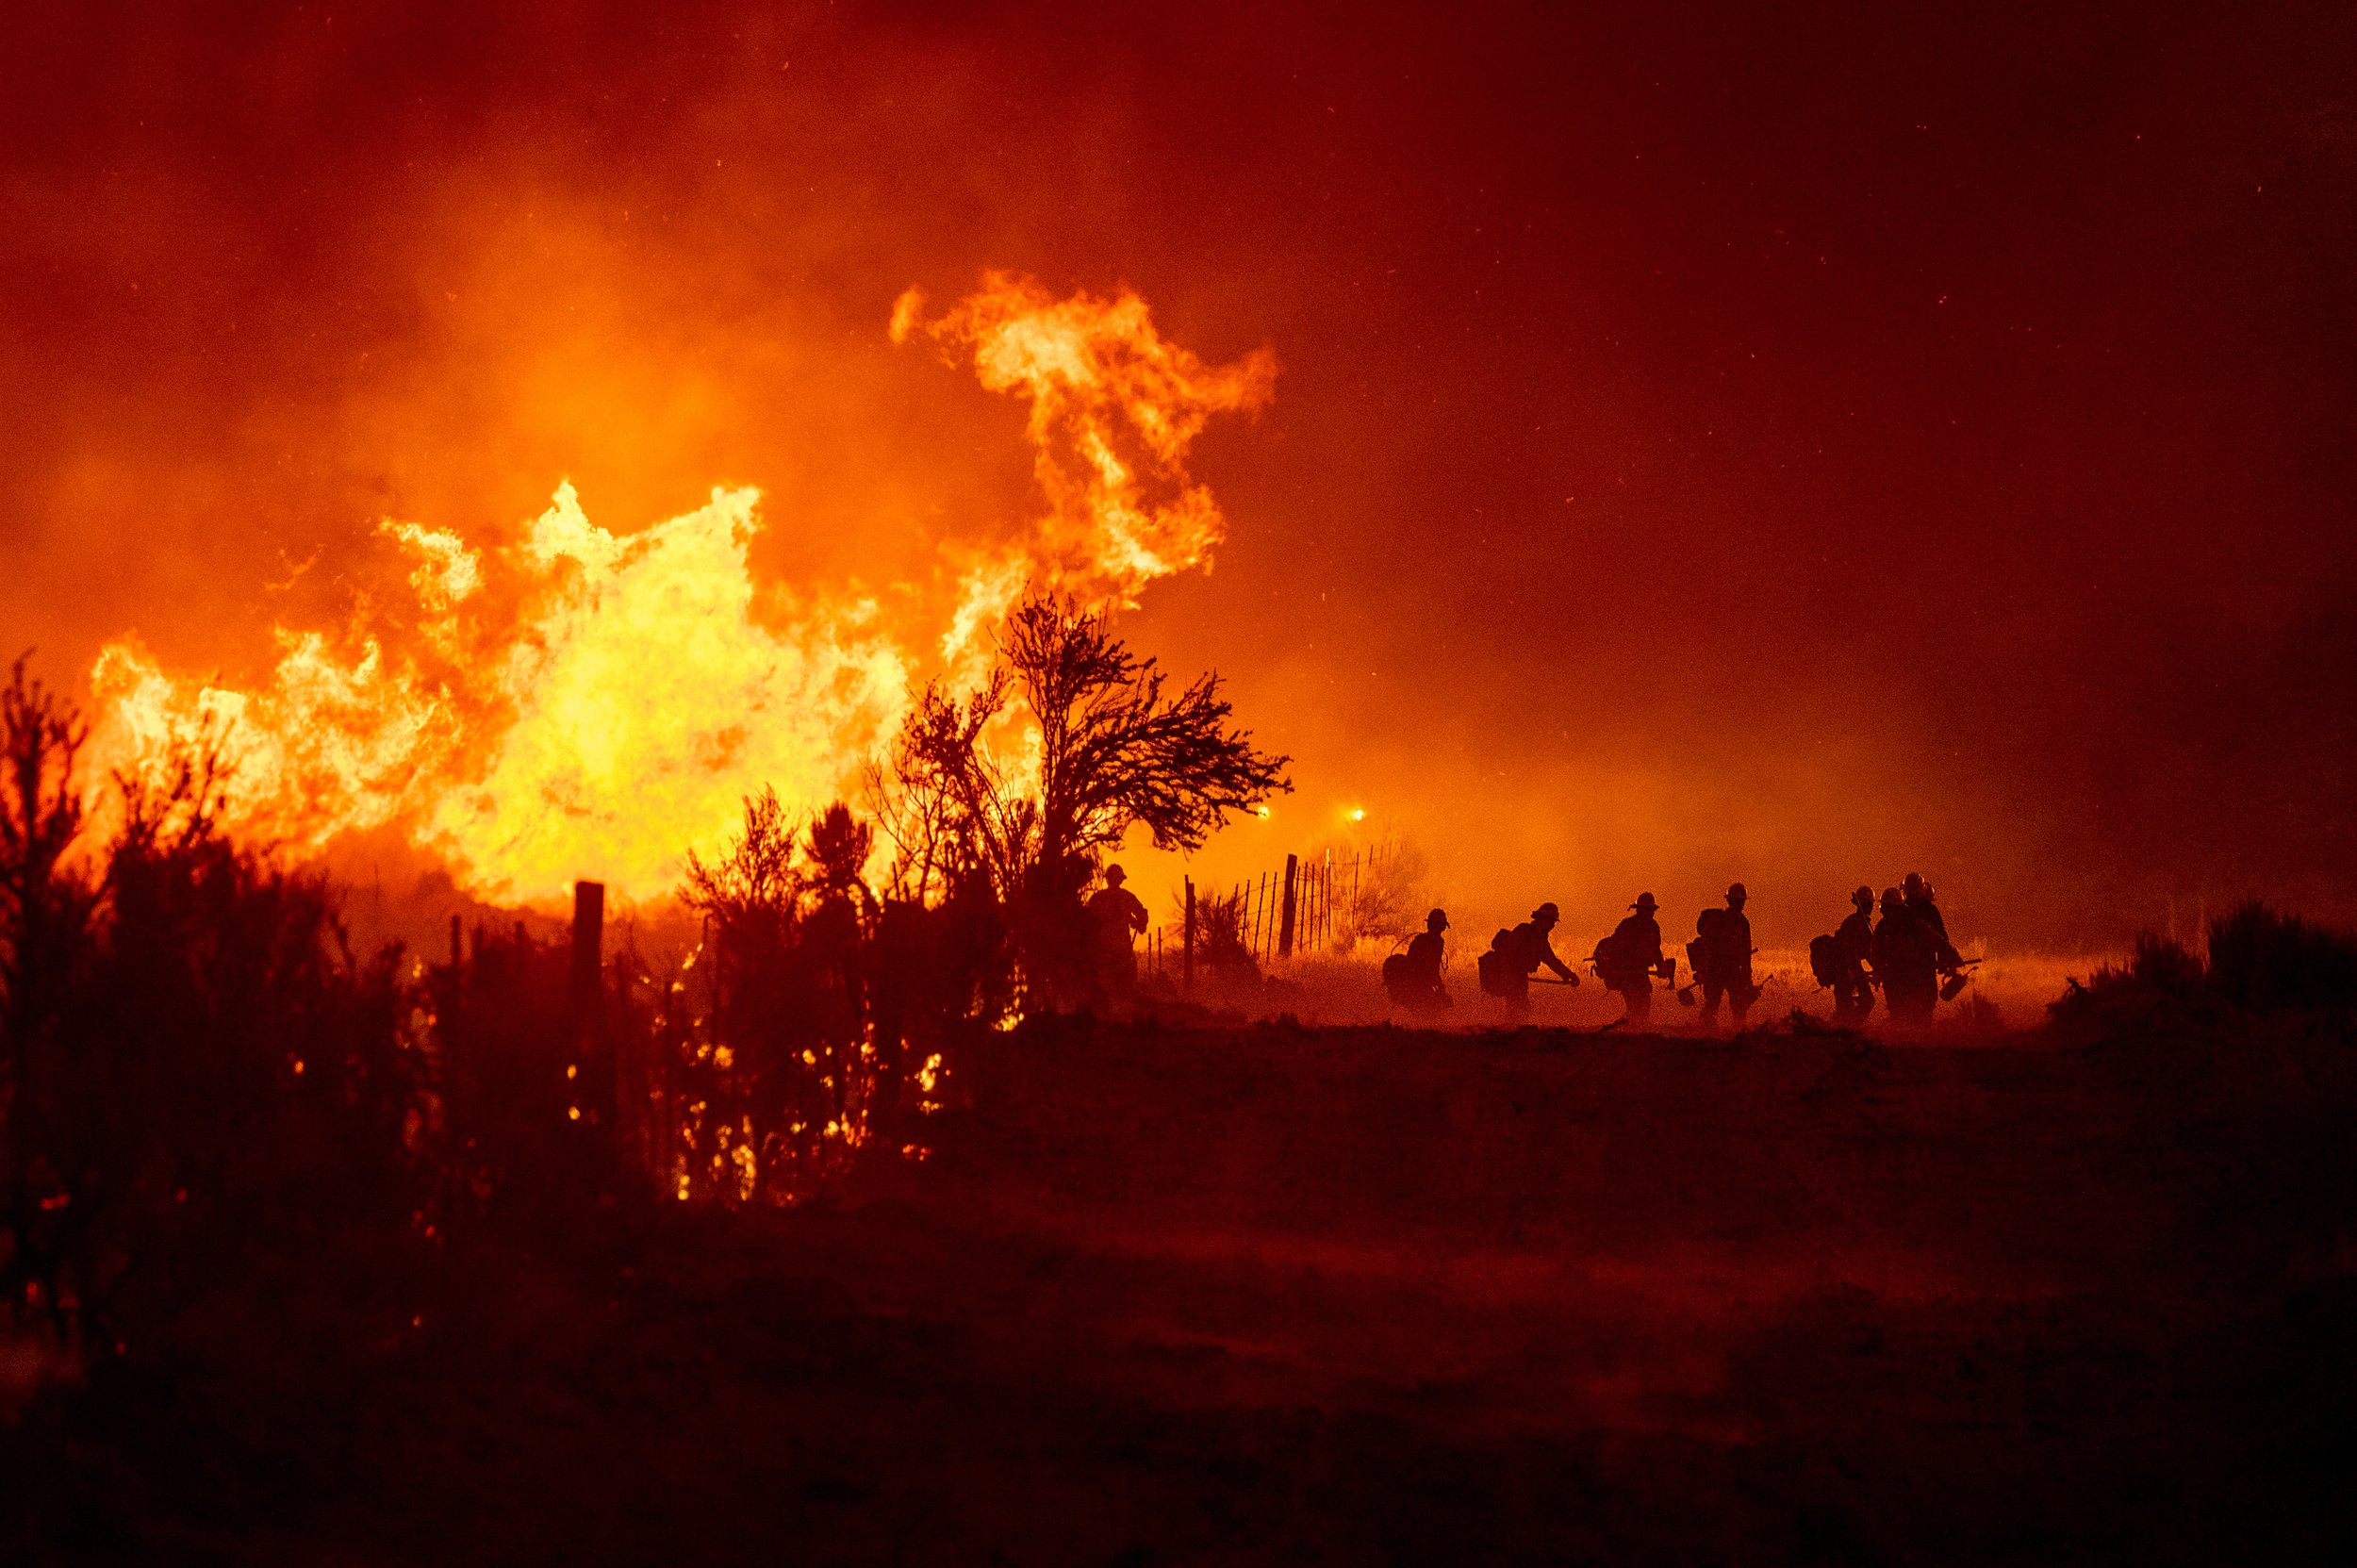  Firefighters battle the Sugar Fire, part of the Beckwourth Complex Fire, in Doyle, Calif., on July 9, 2021. (AP Photo/Noah Berger) 